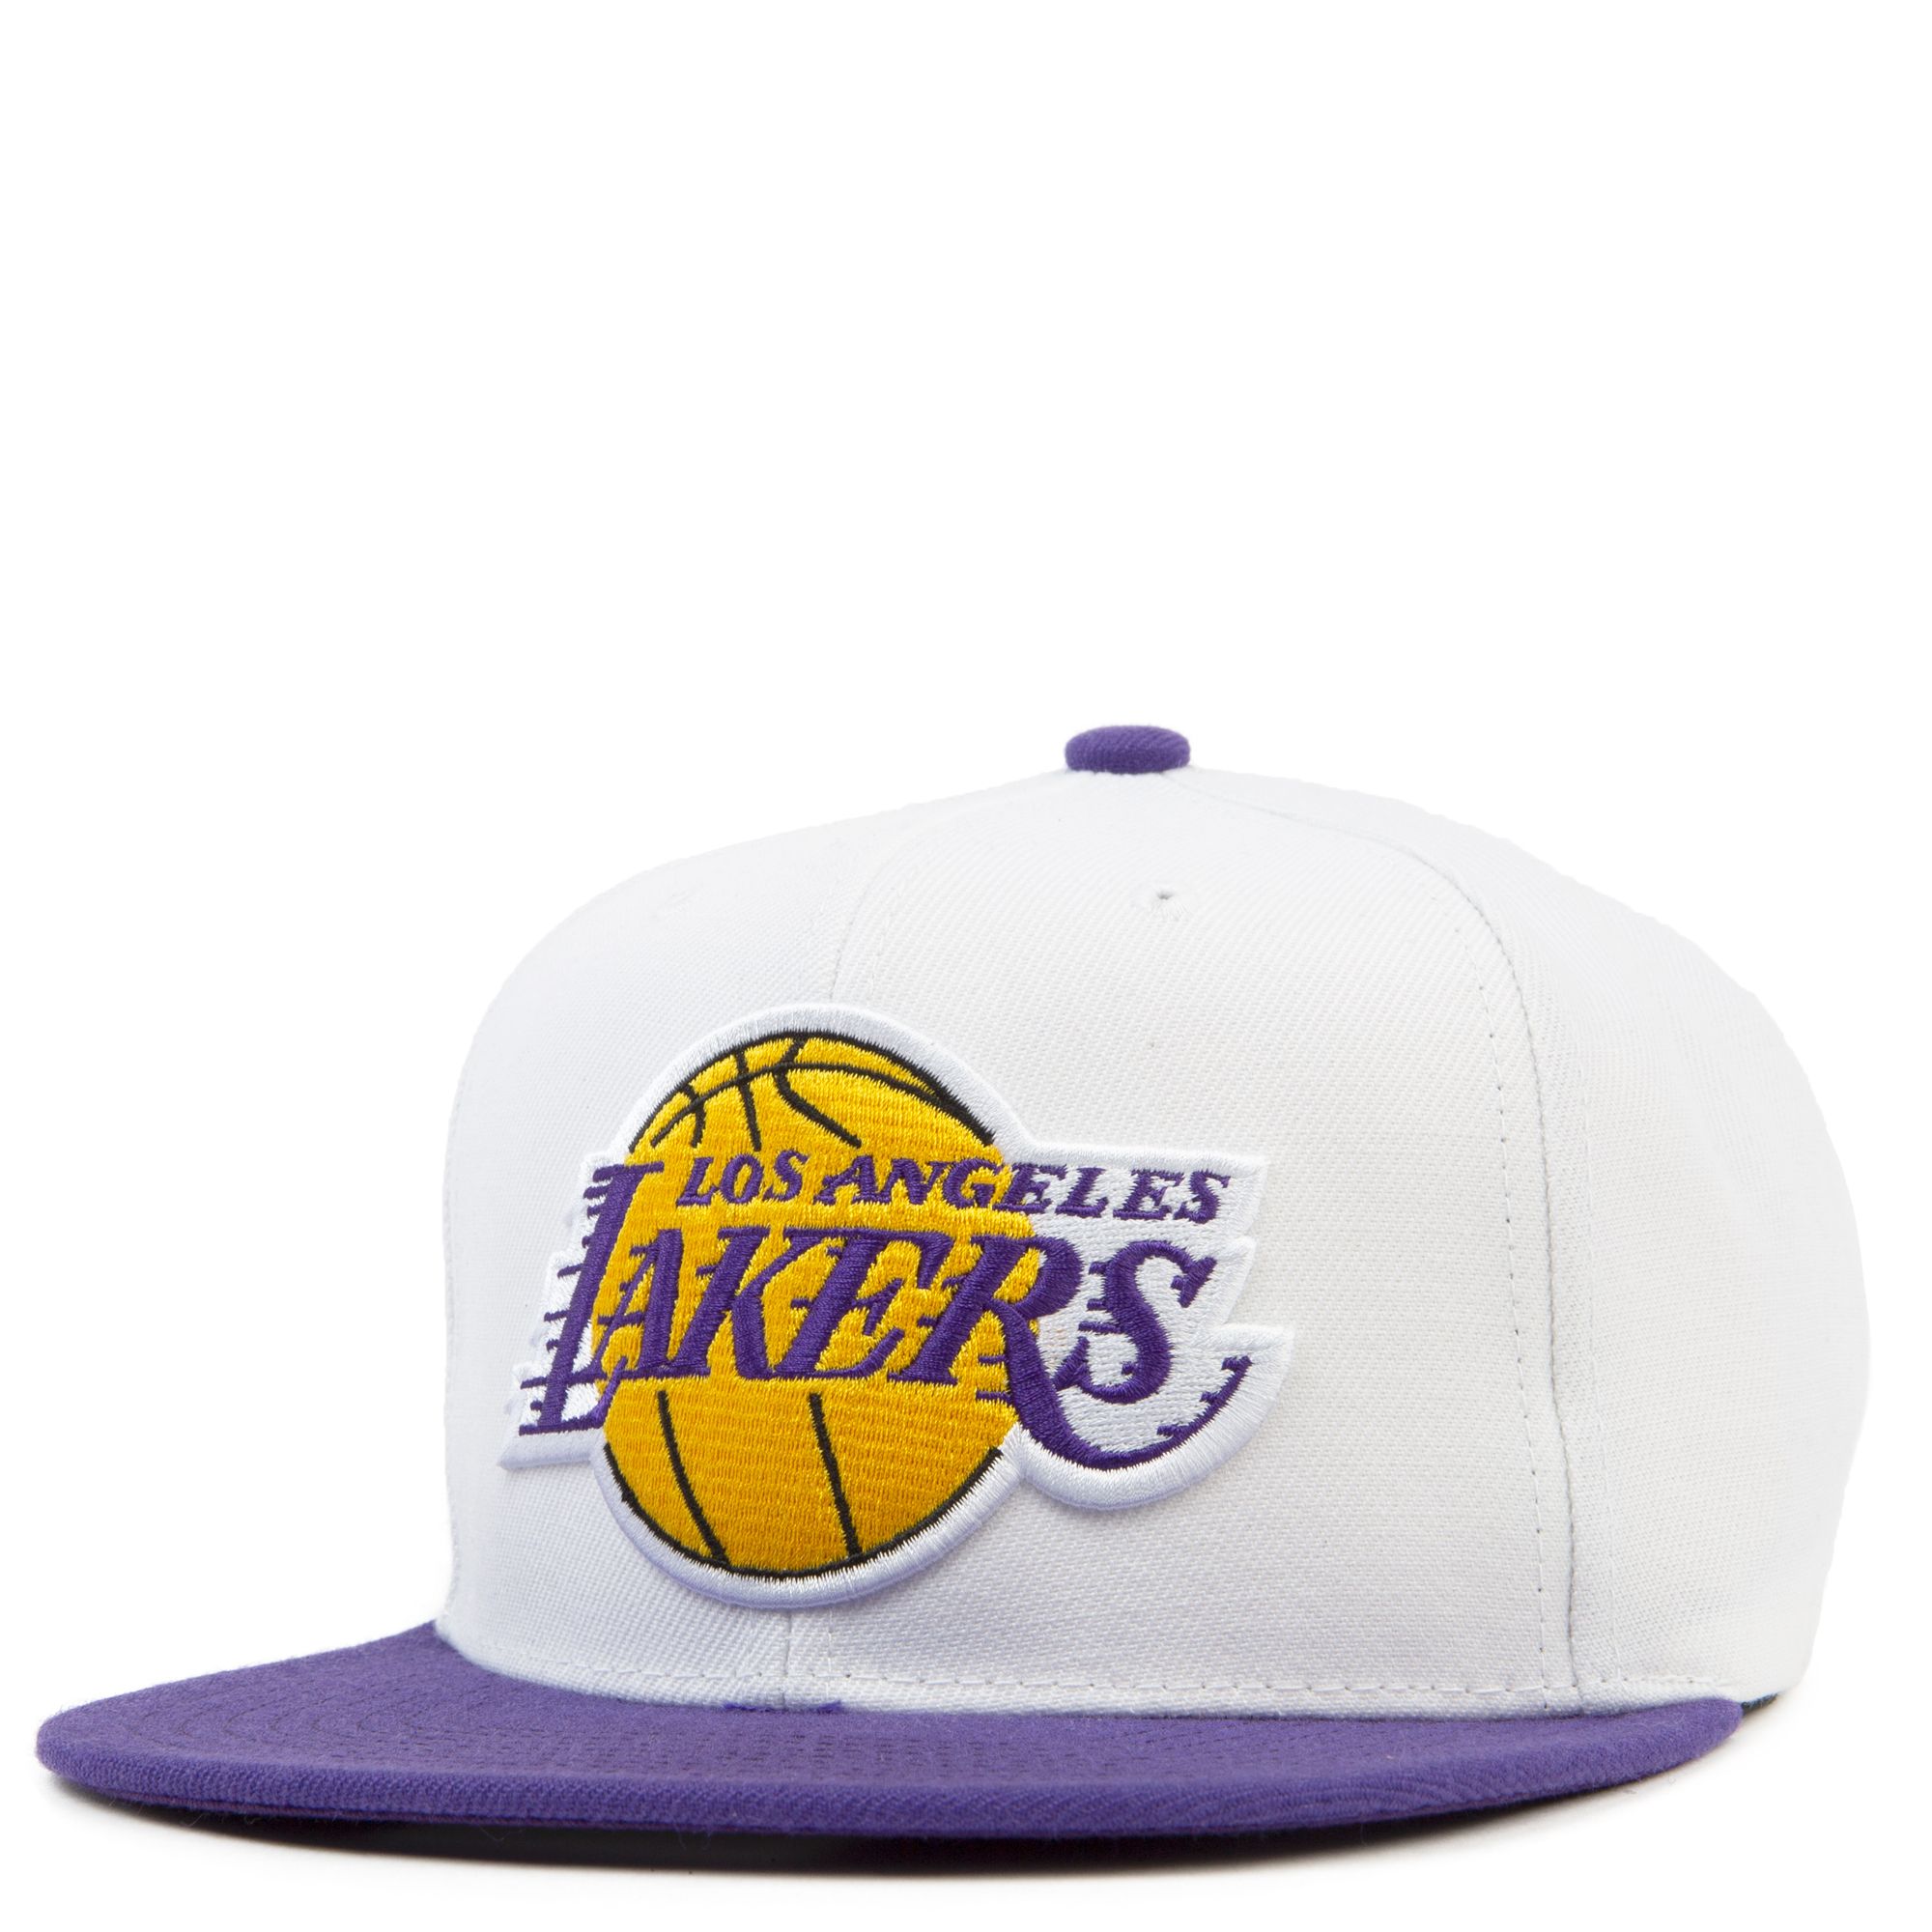 Mitchell & Ness LA Lakers White Purple Gold Shark Tooth Snapback Hat Cap NEW